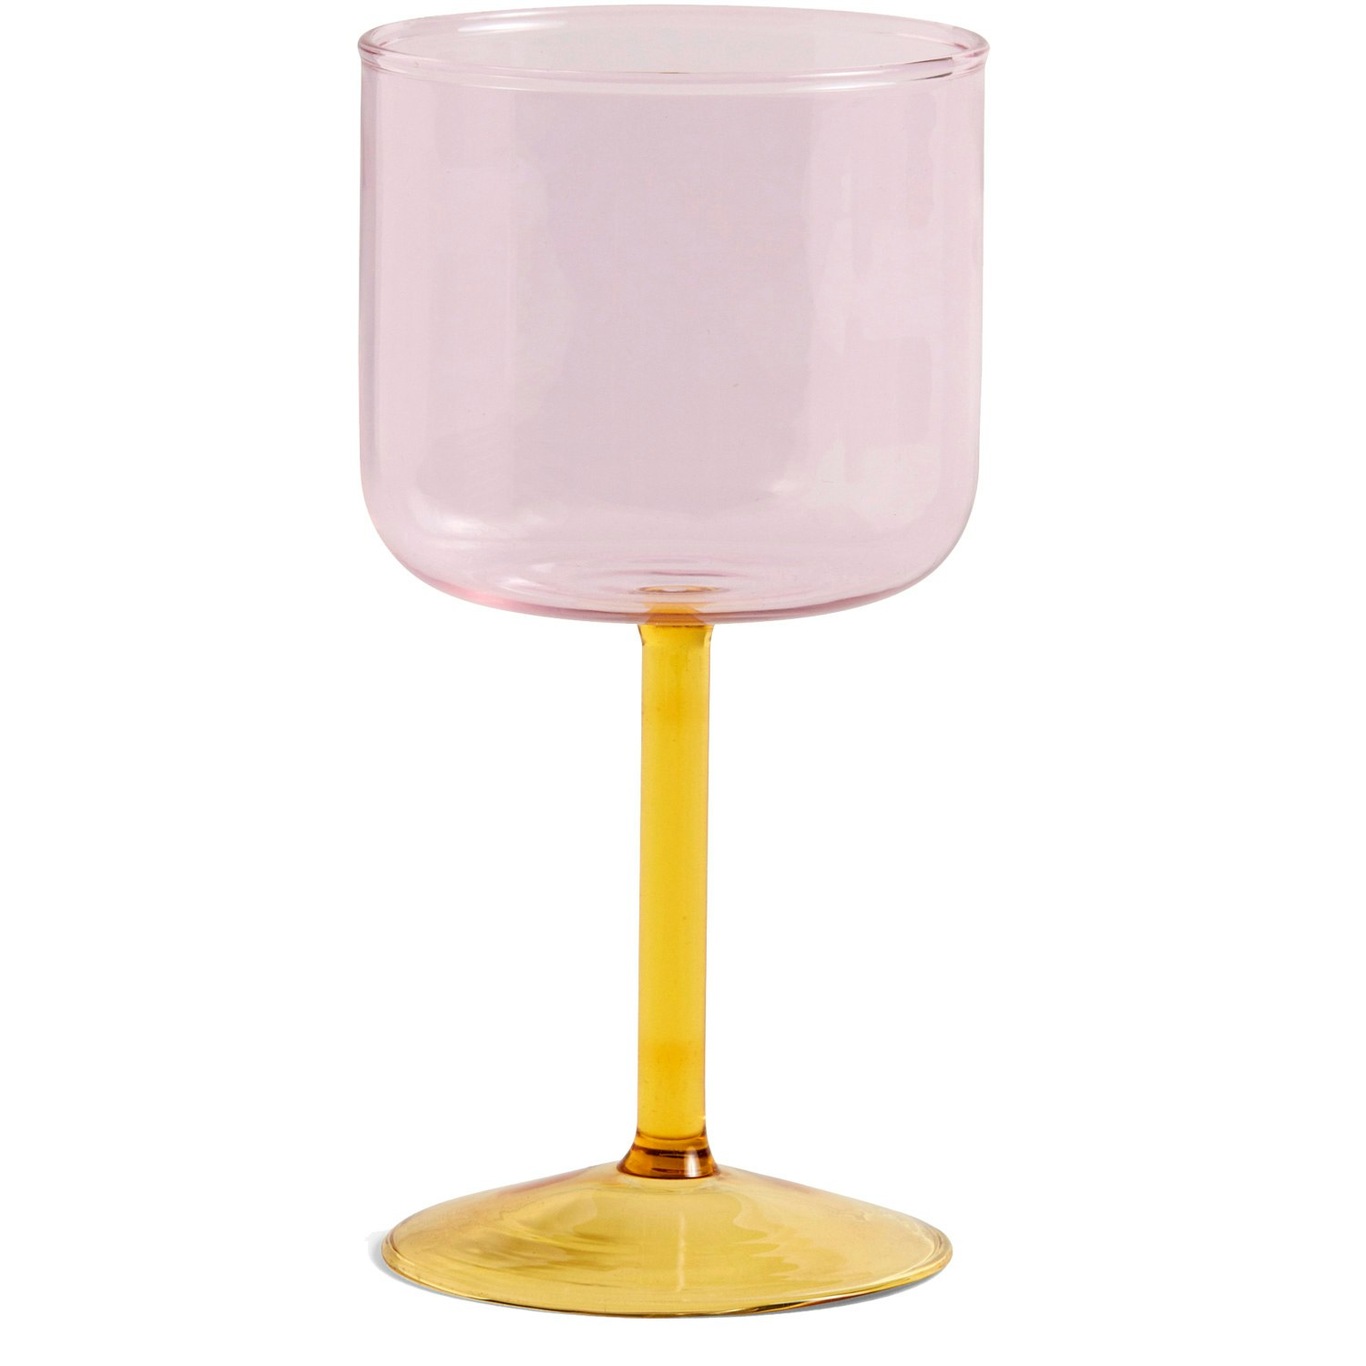 Tint Wine Glass 2-pack, Pink / Yellow